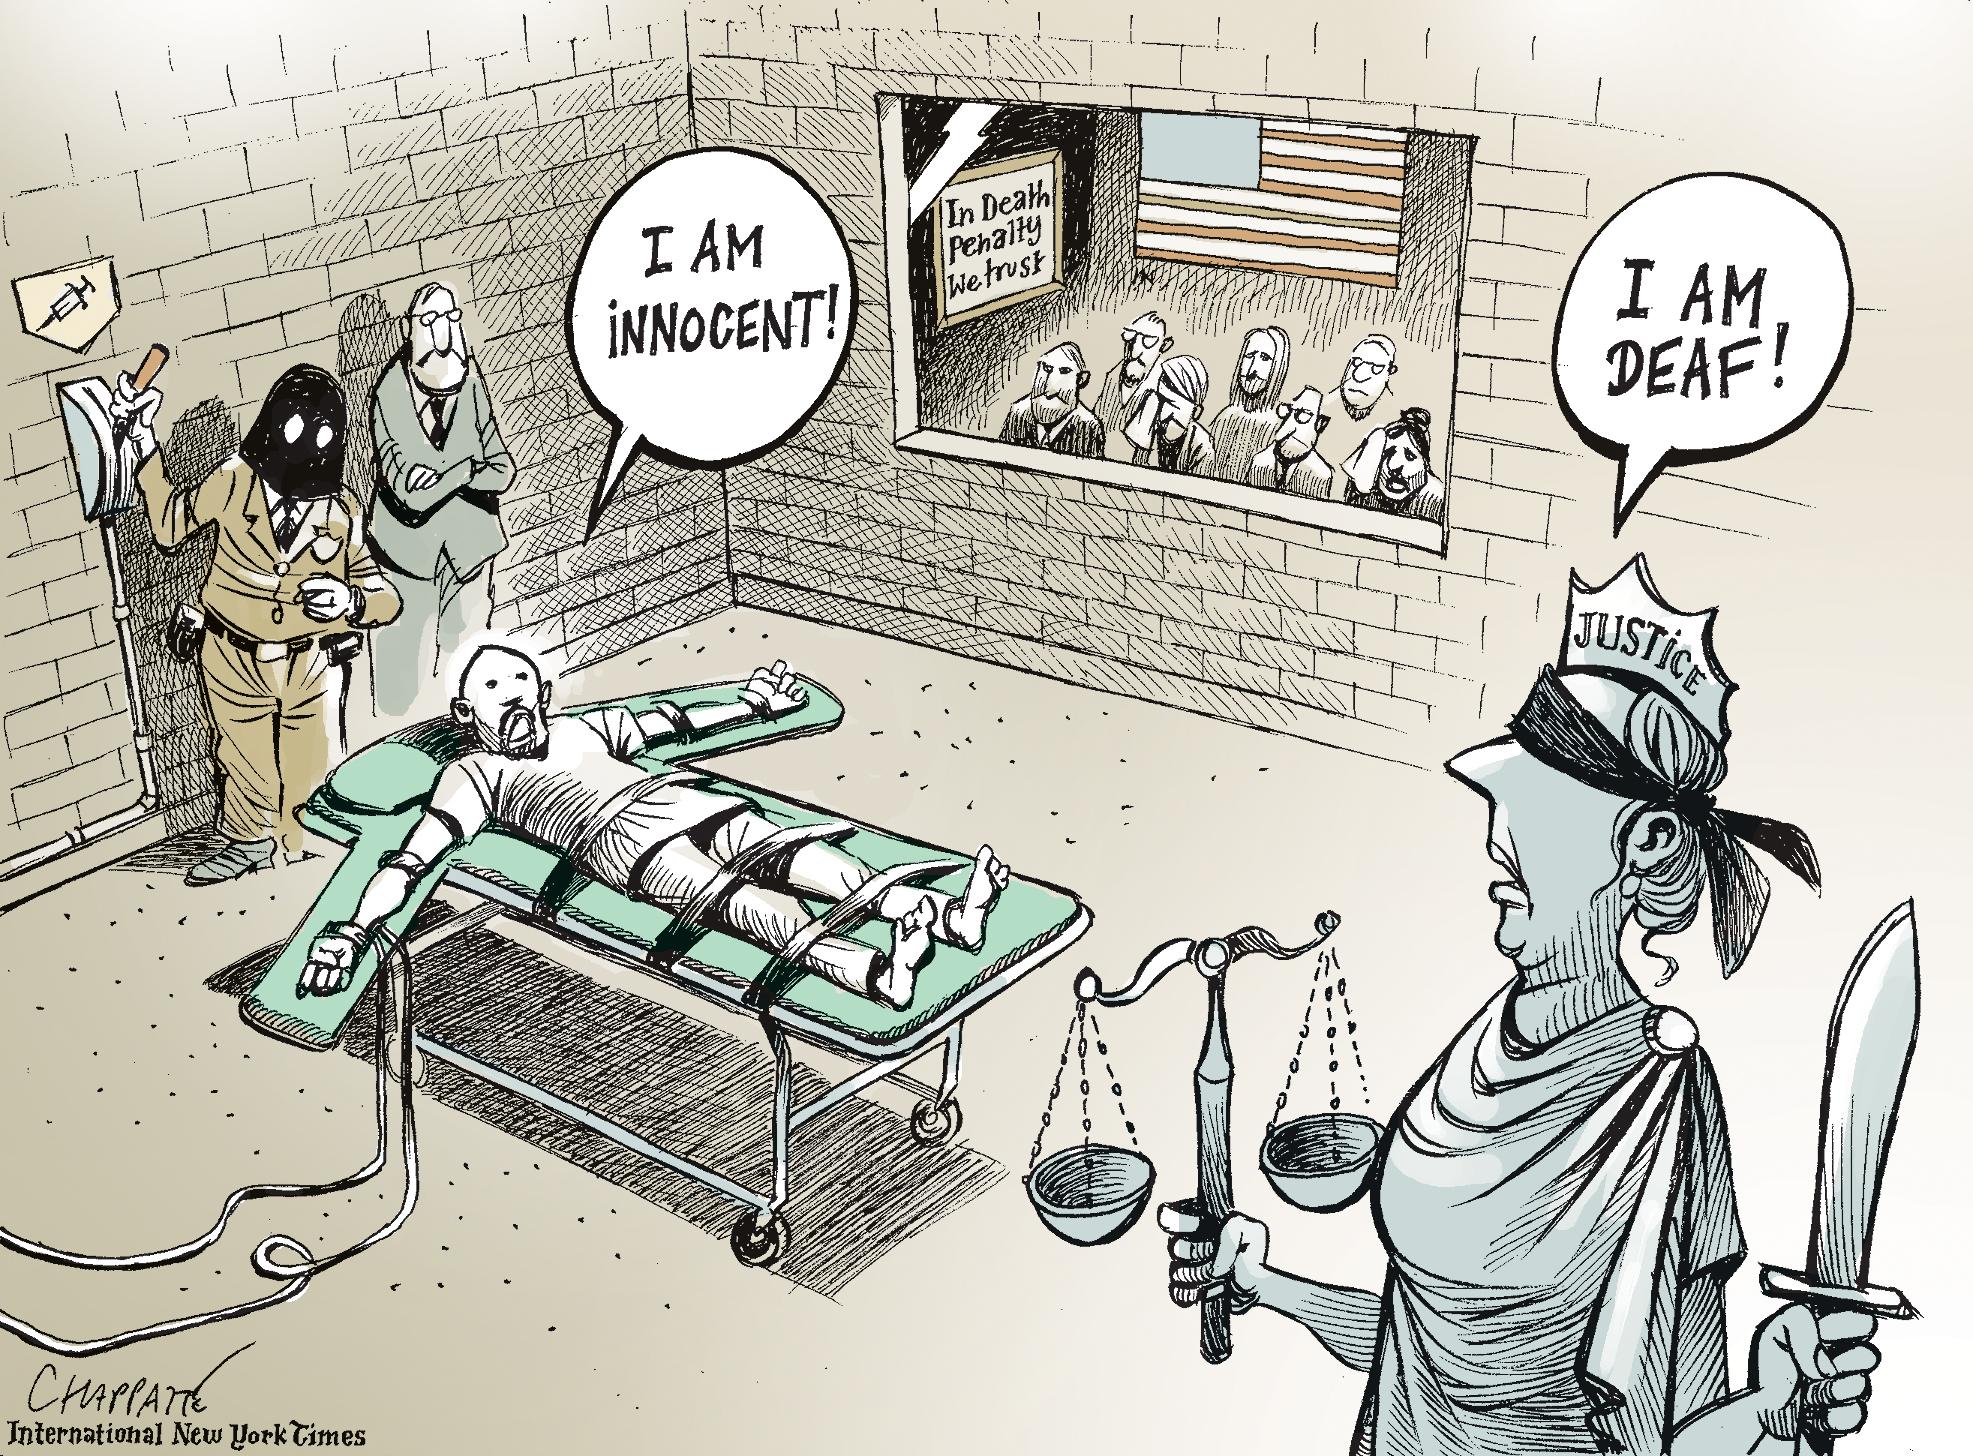 Death penalty in the USA